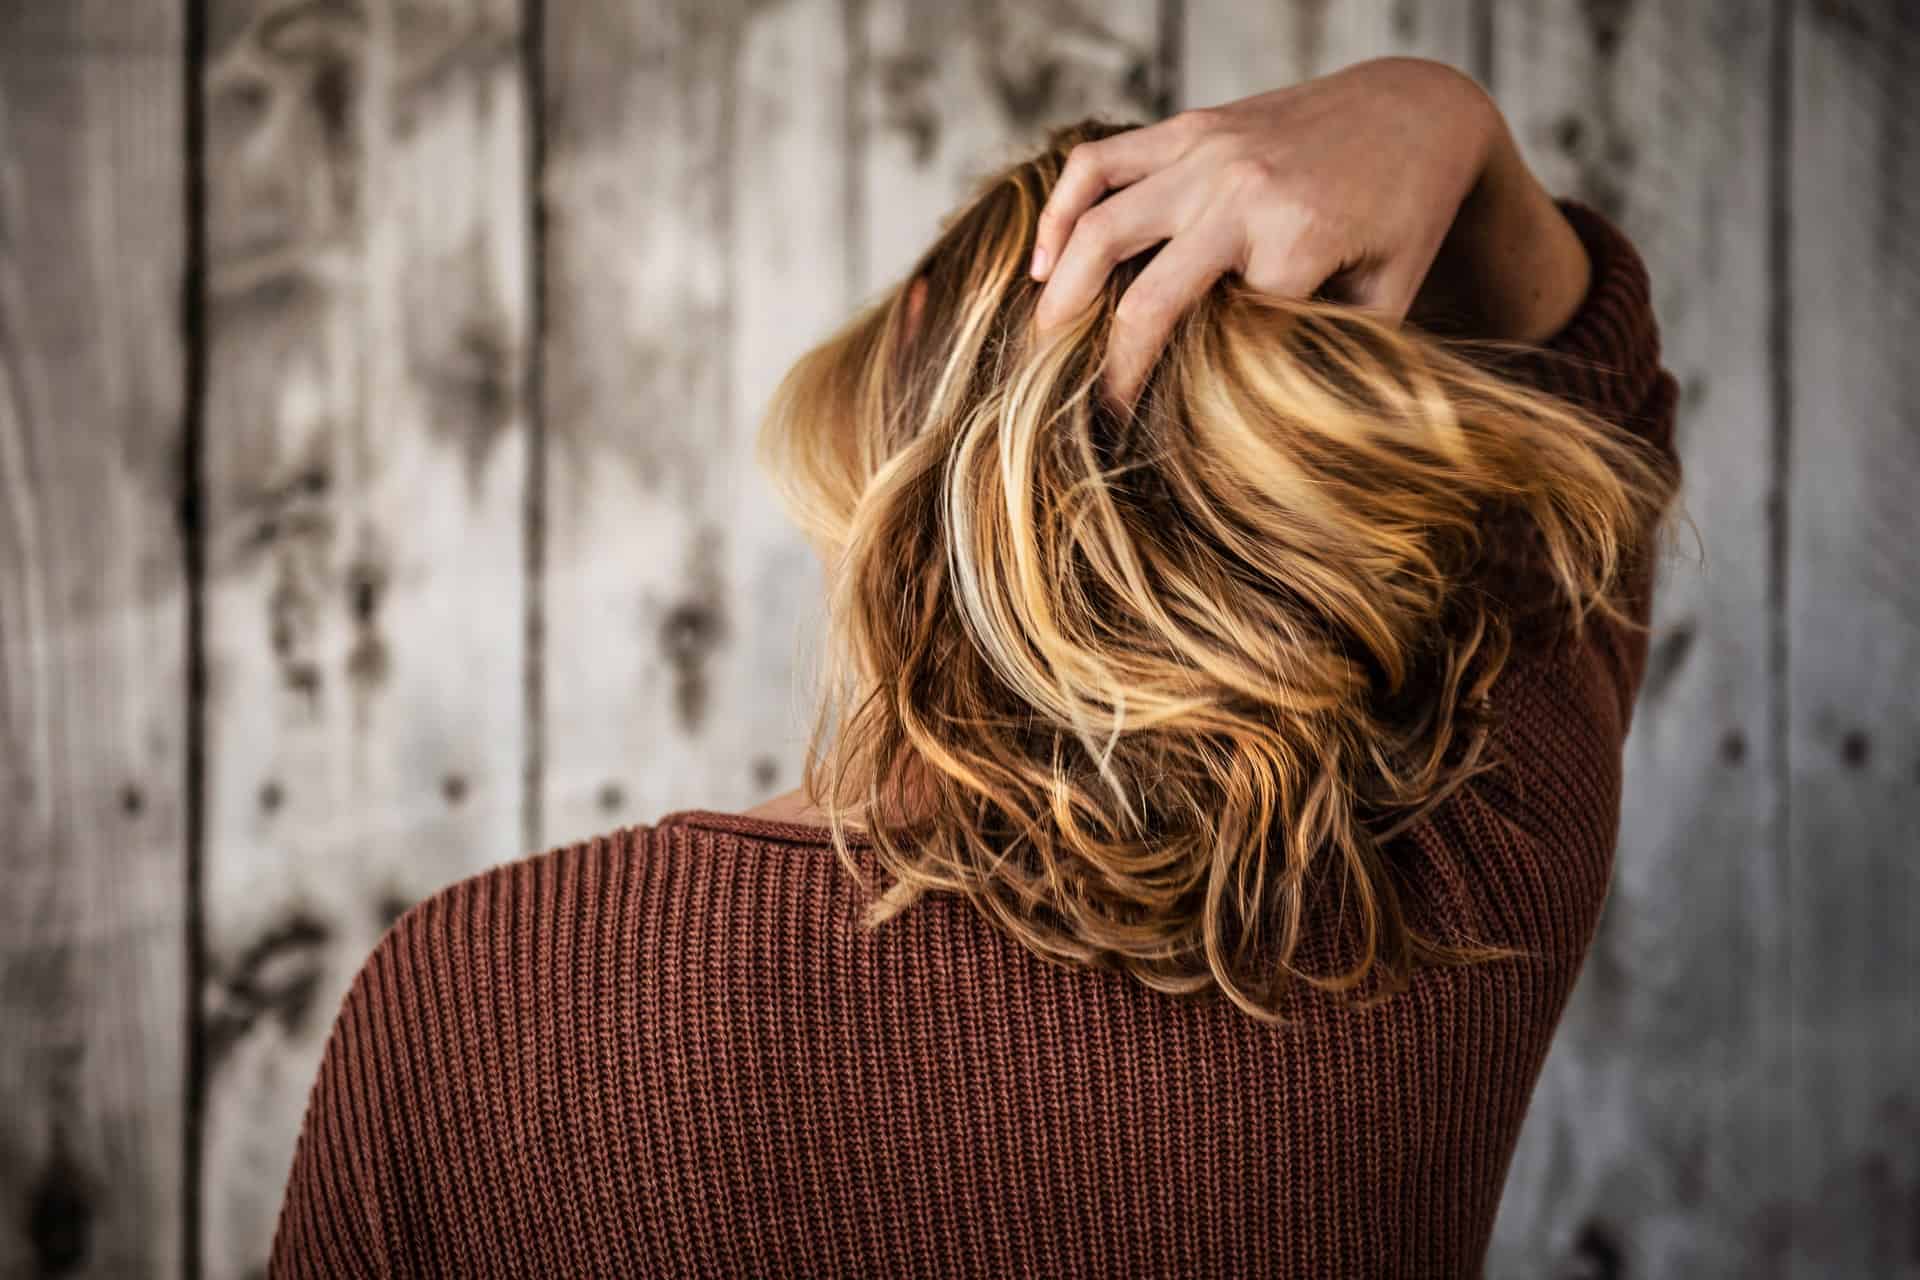 What should you do if your hair starts to fall out?